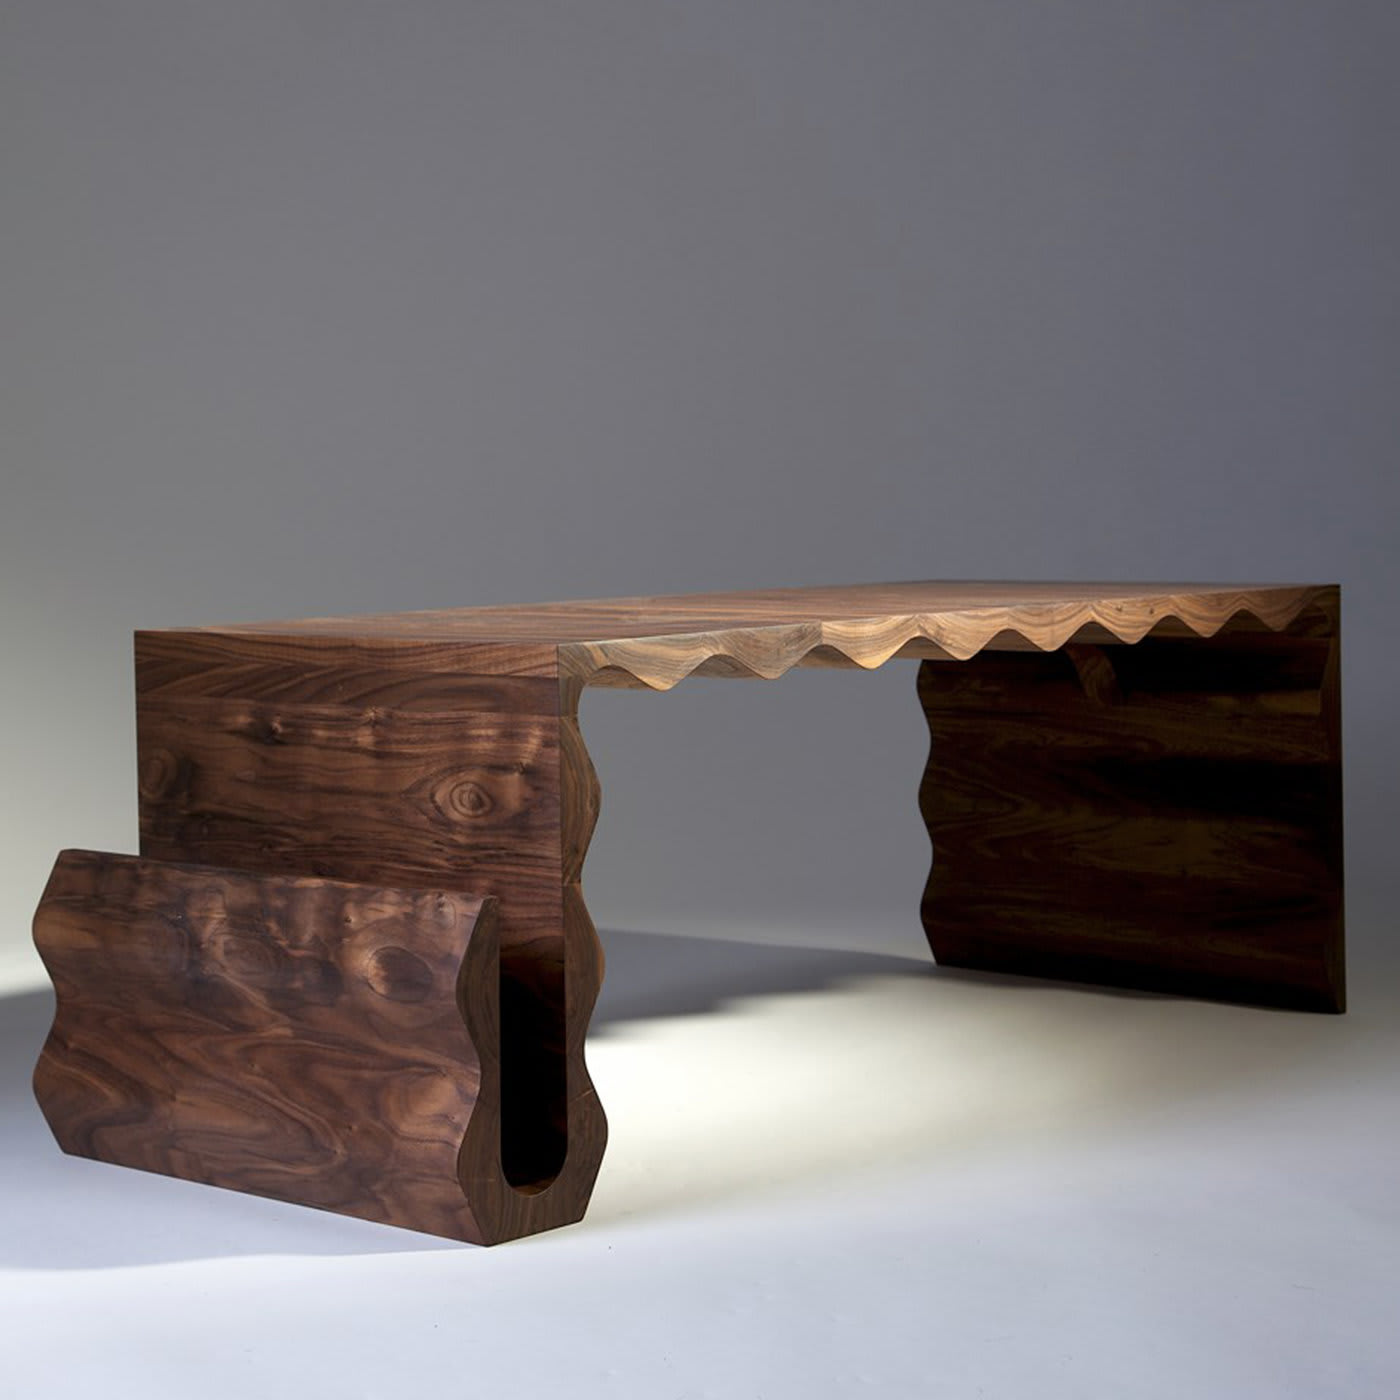 Optable Wood Coffee table by Mauro Dell'Orco - Faedo